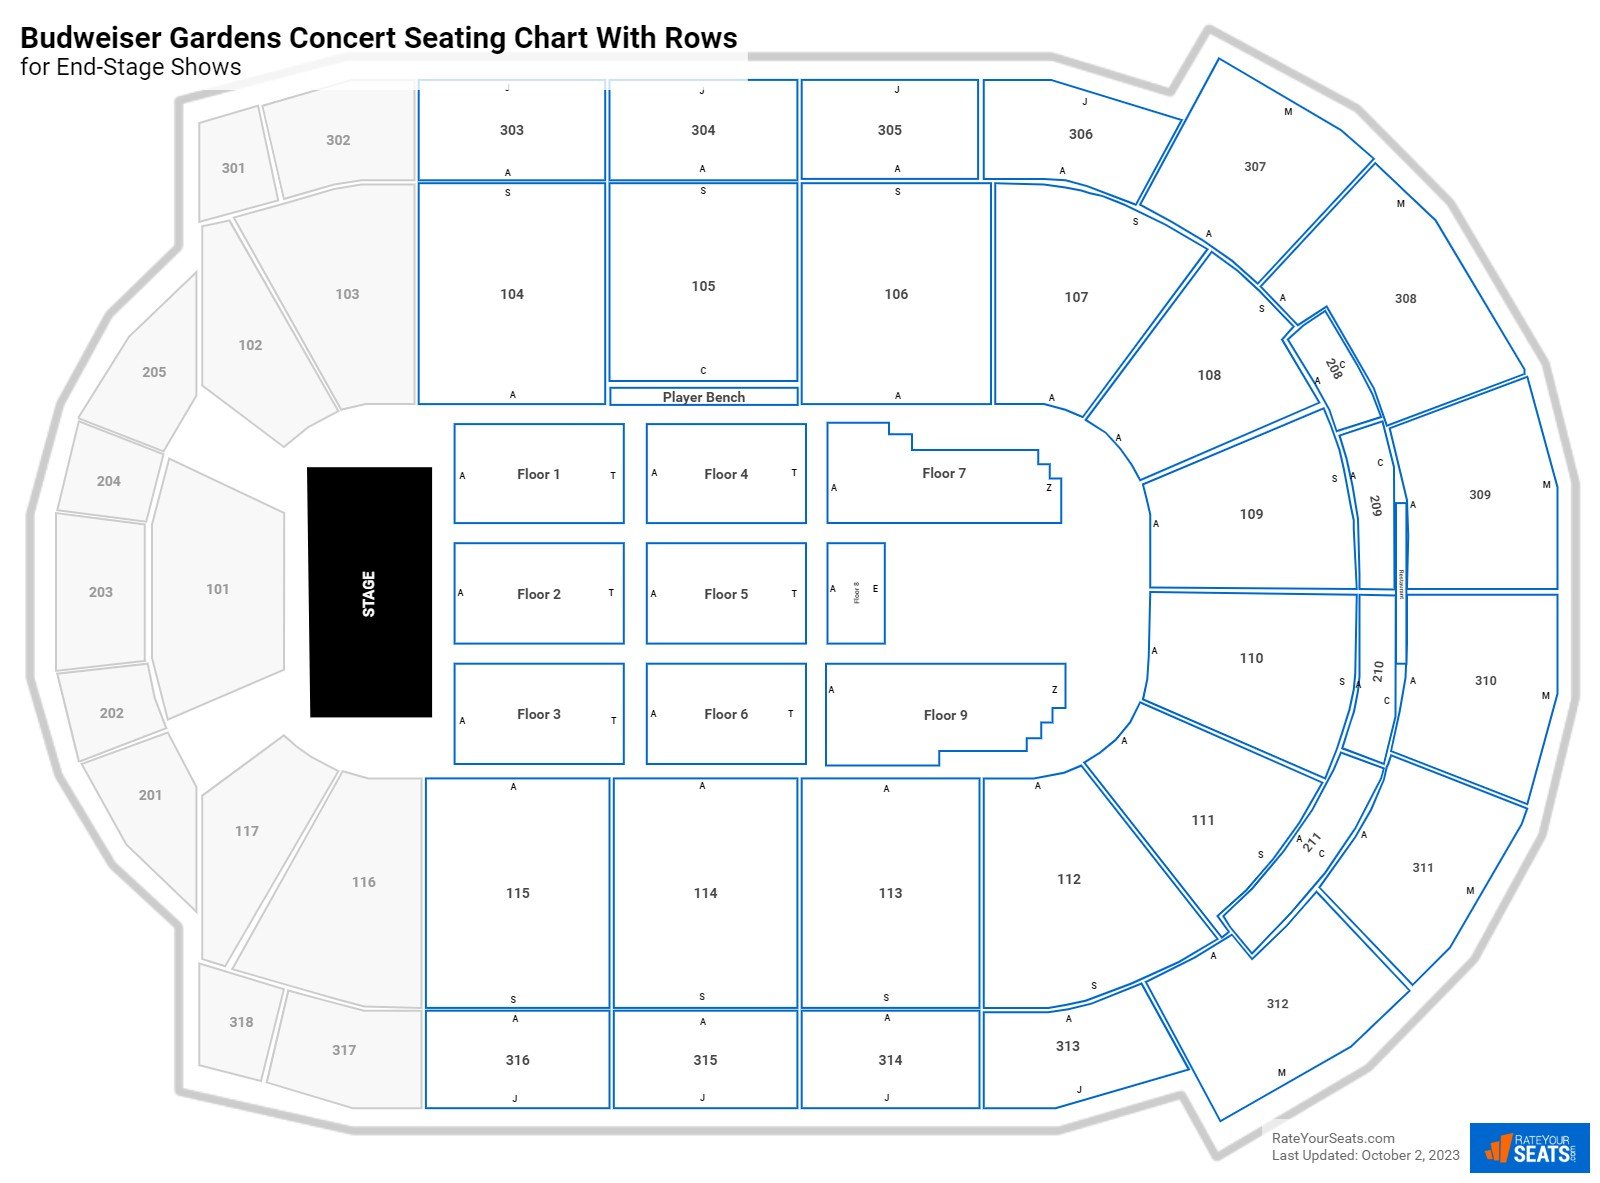 Budweiser Gardens seating chart with row numbers